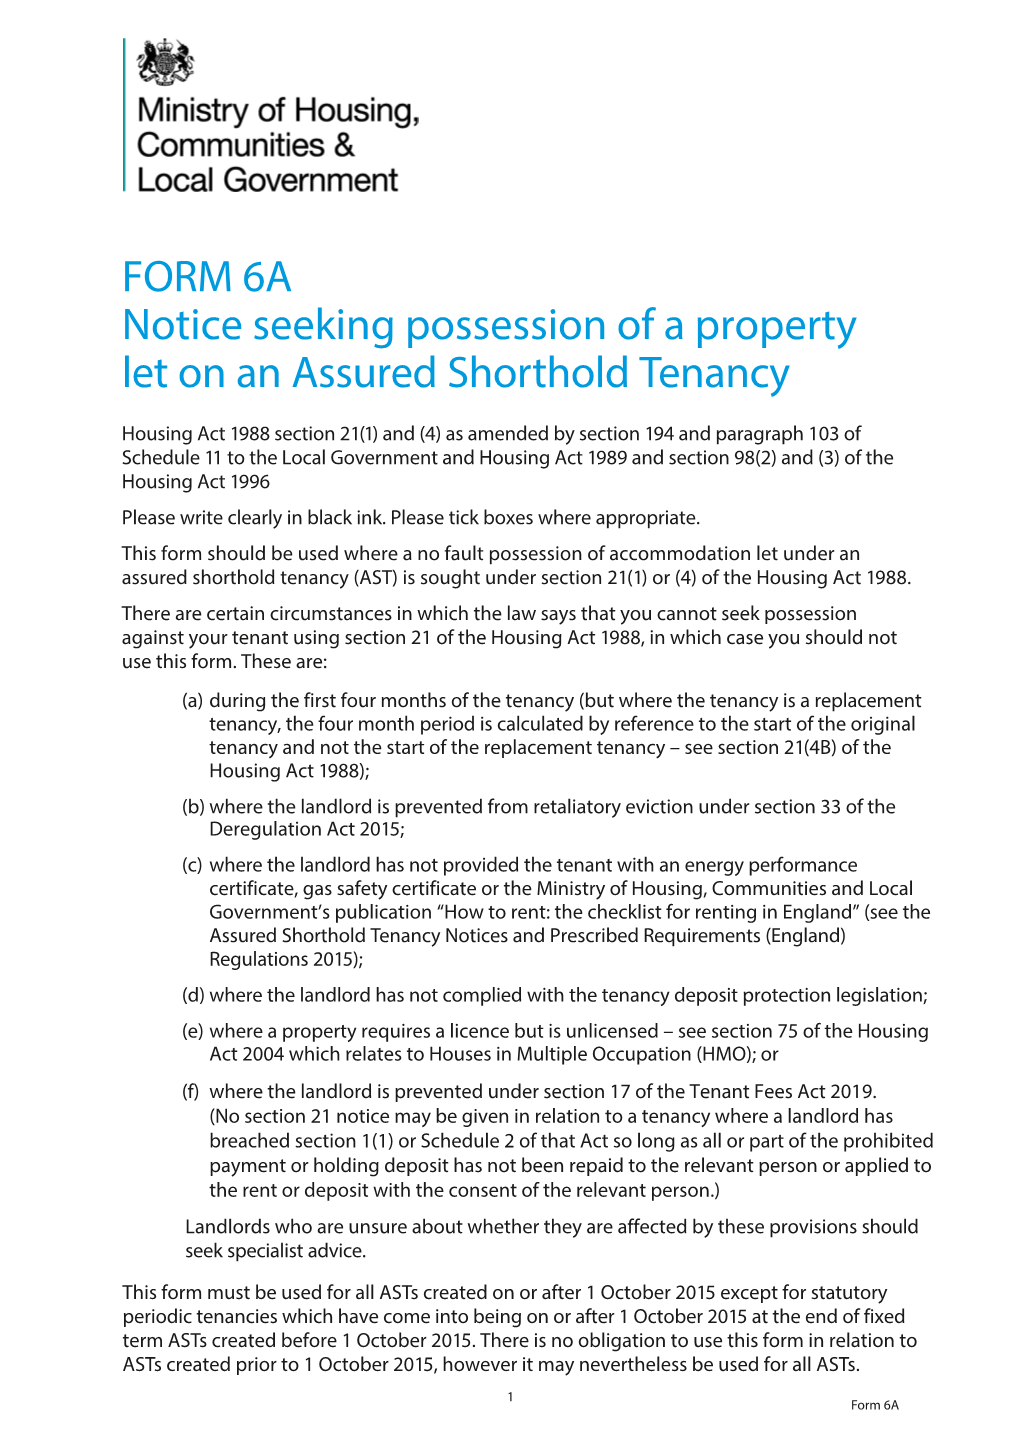 FORM 6A Notice Seeking Possession of a Property Let on an Assured Shorthold Tenancy